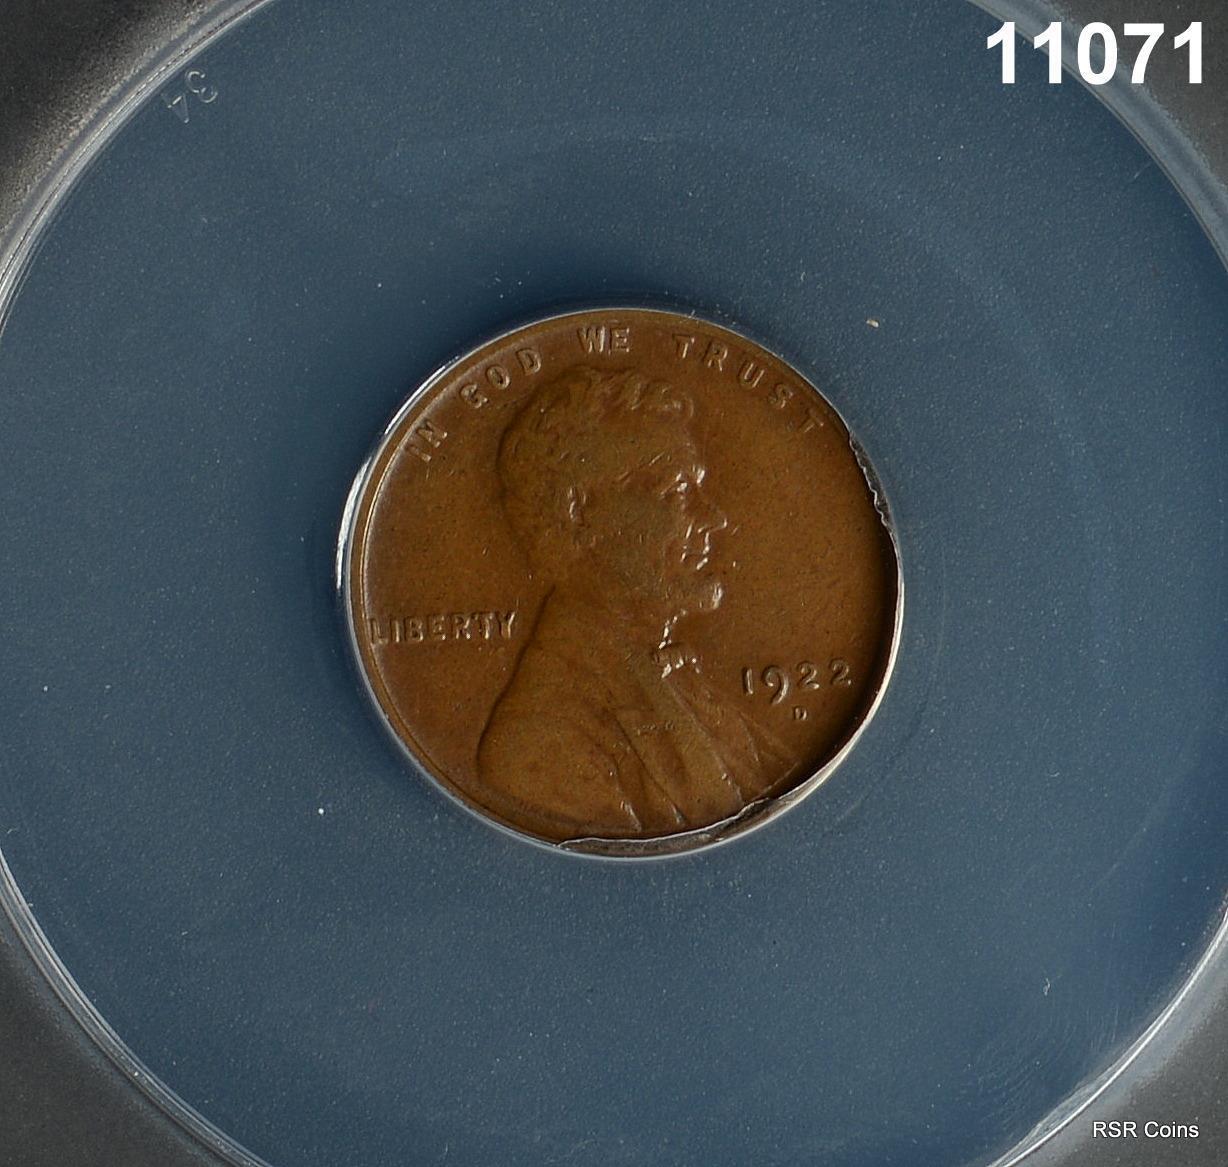 1922 D LINCOLN CENT ANACS CERTIFIED VF25 #11071